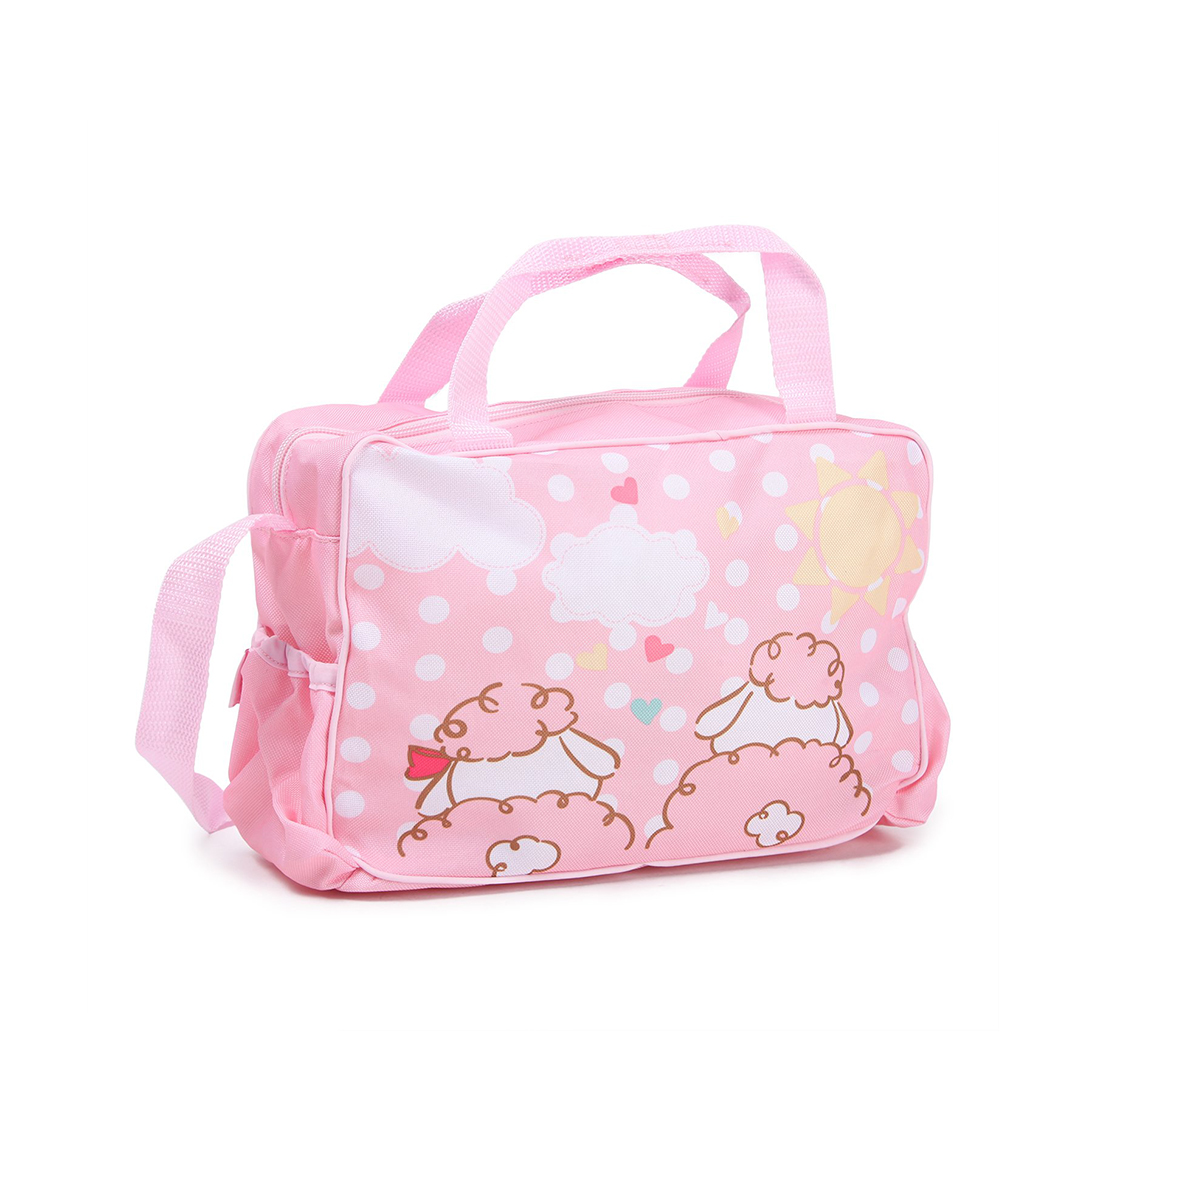 Zapf Creation-Baby Annabell Travel Changing Bag With ...